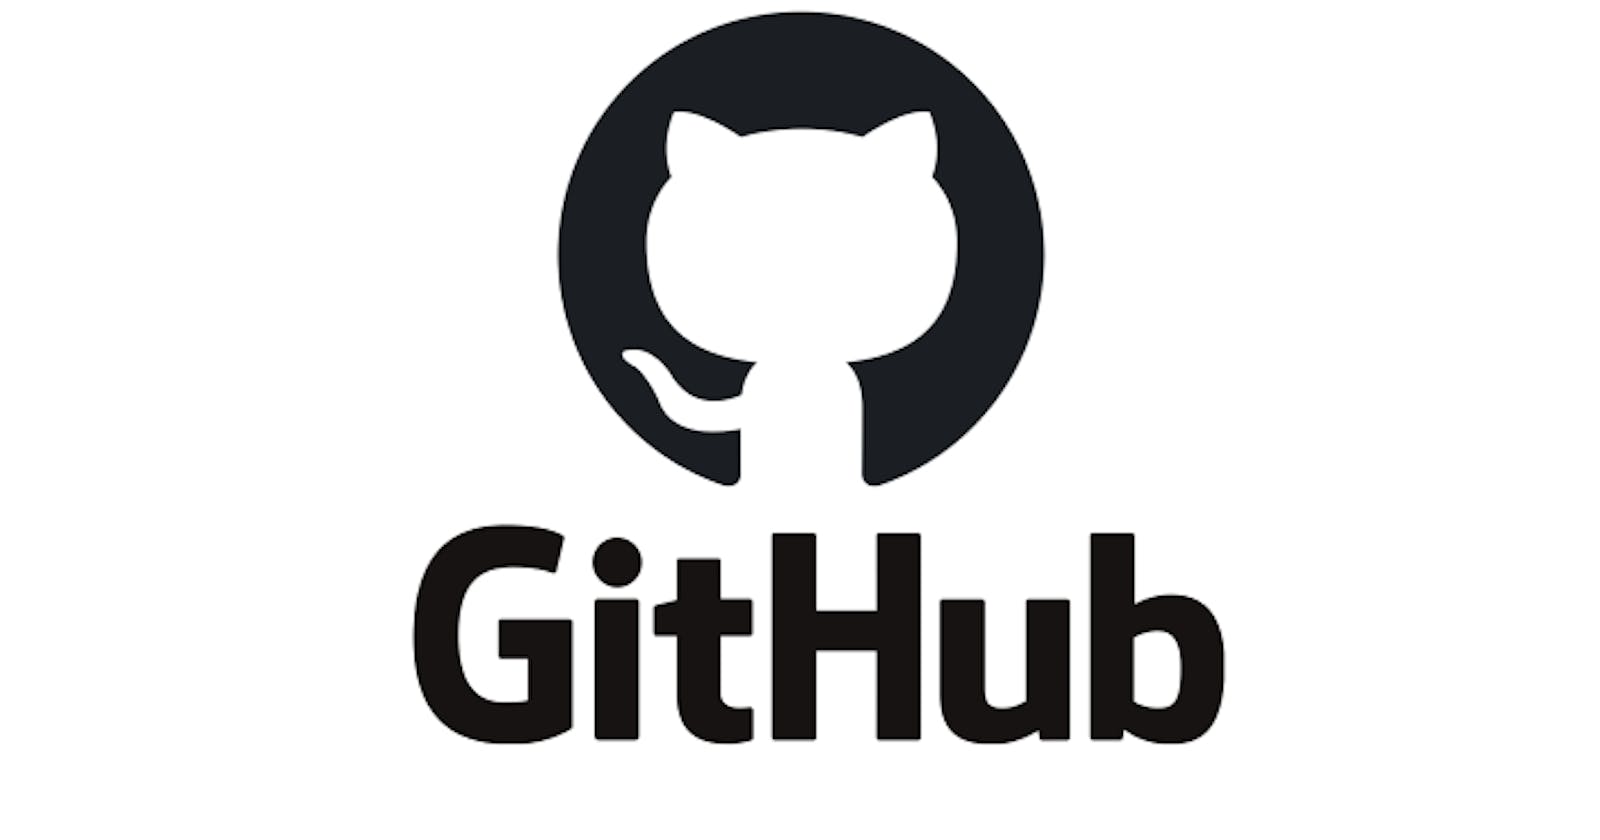 Getting started with GitHub